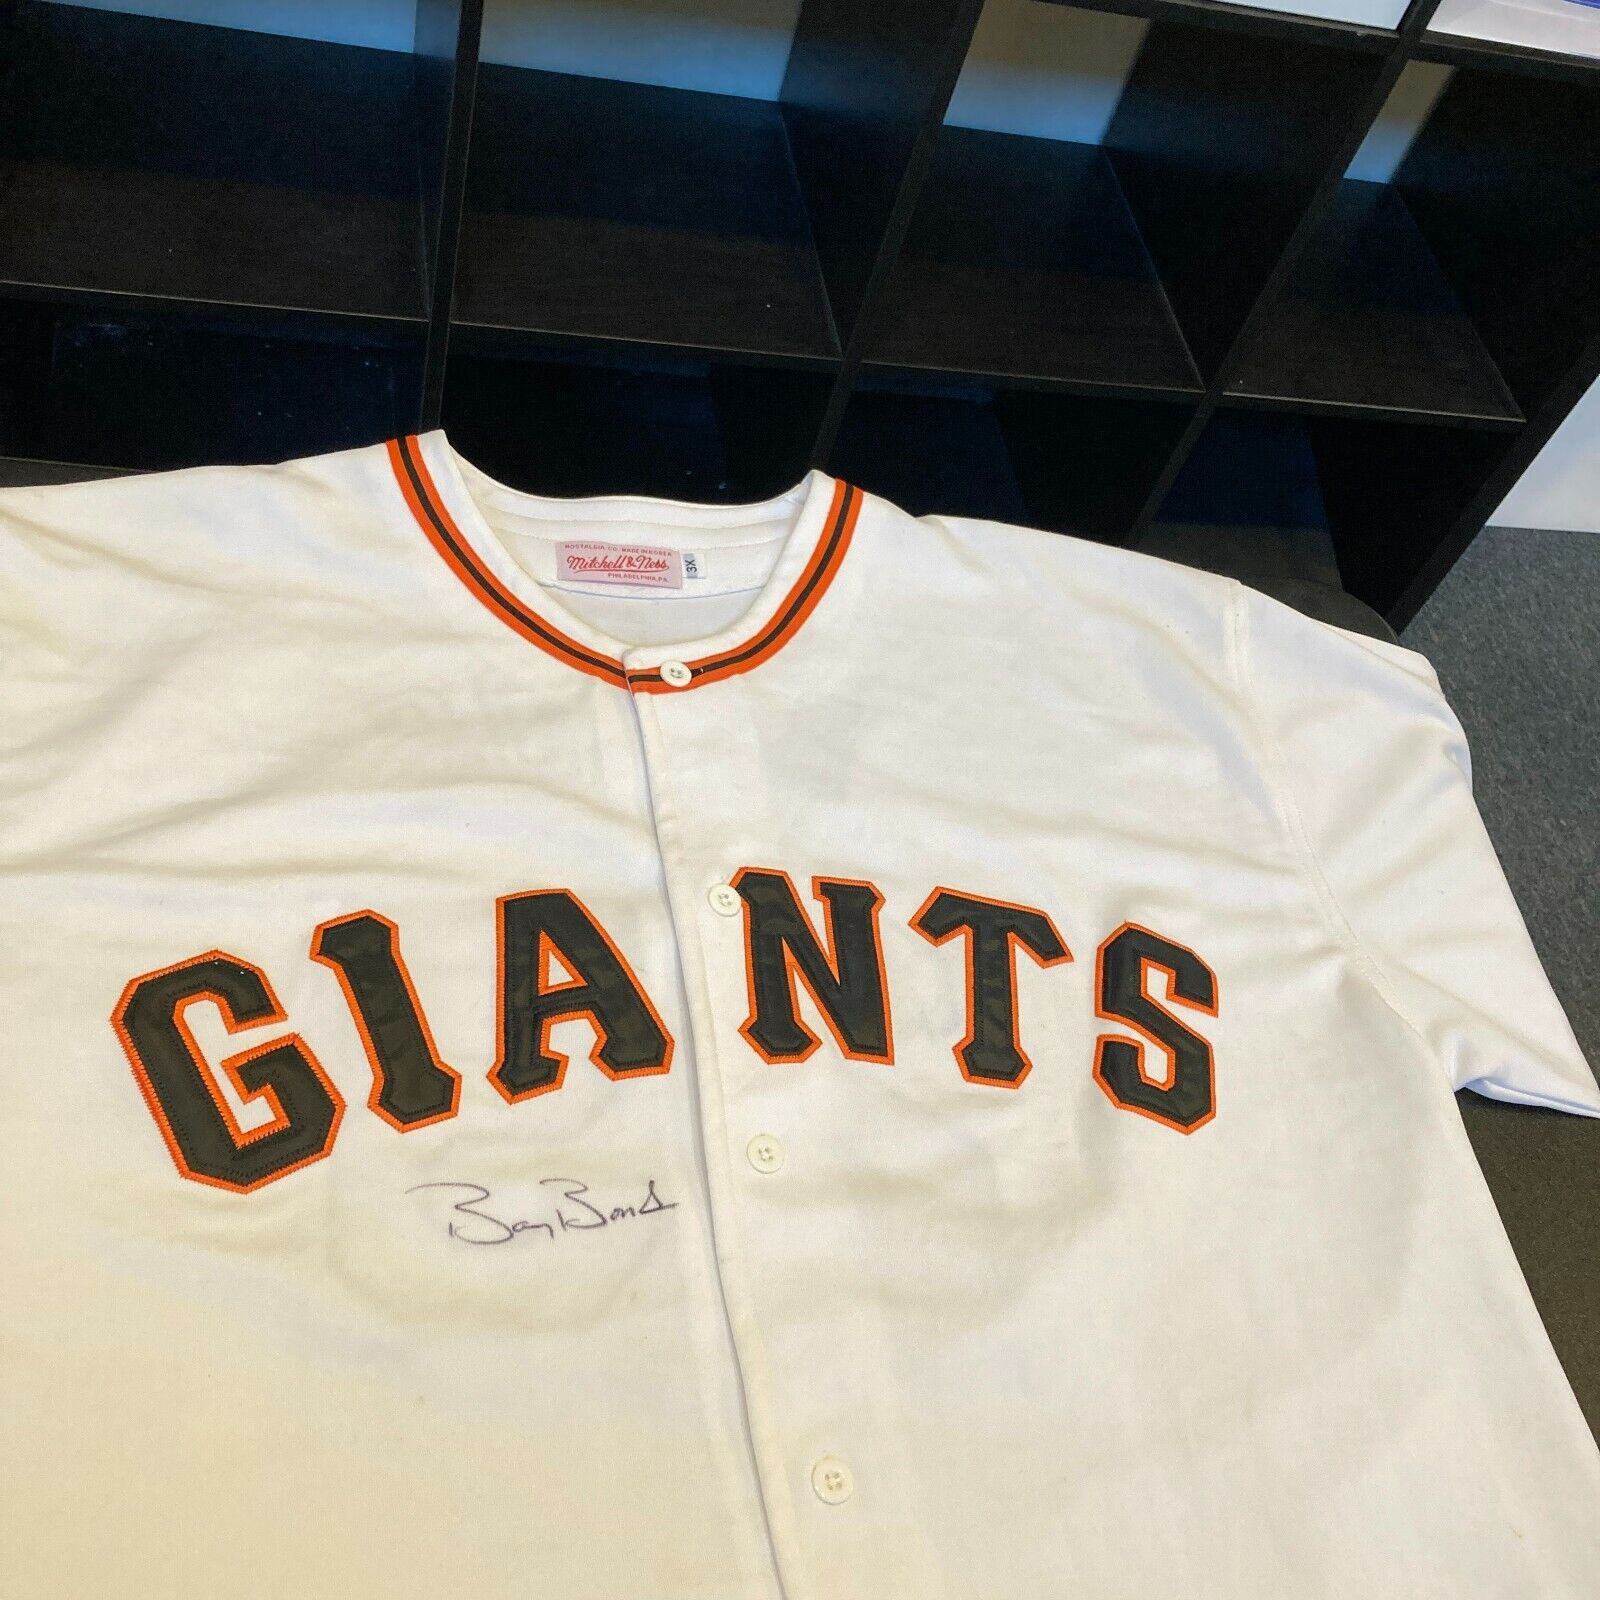 Barry Bonds Autographed White Pittsburgh Pirates Jersey